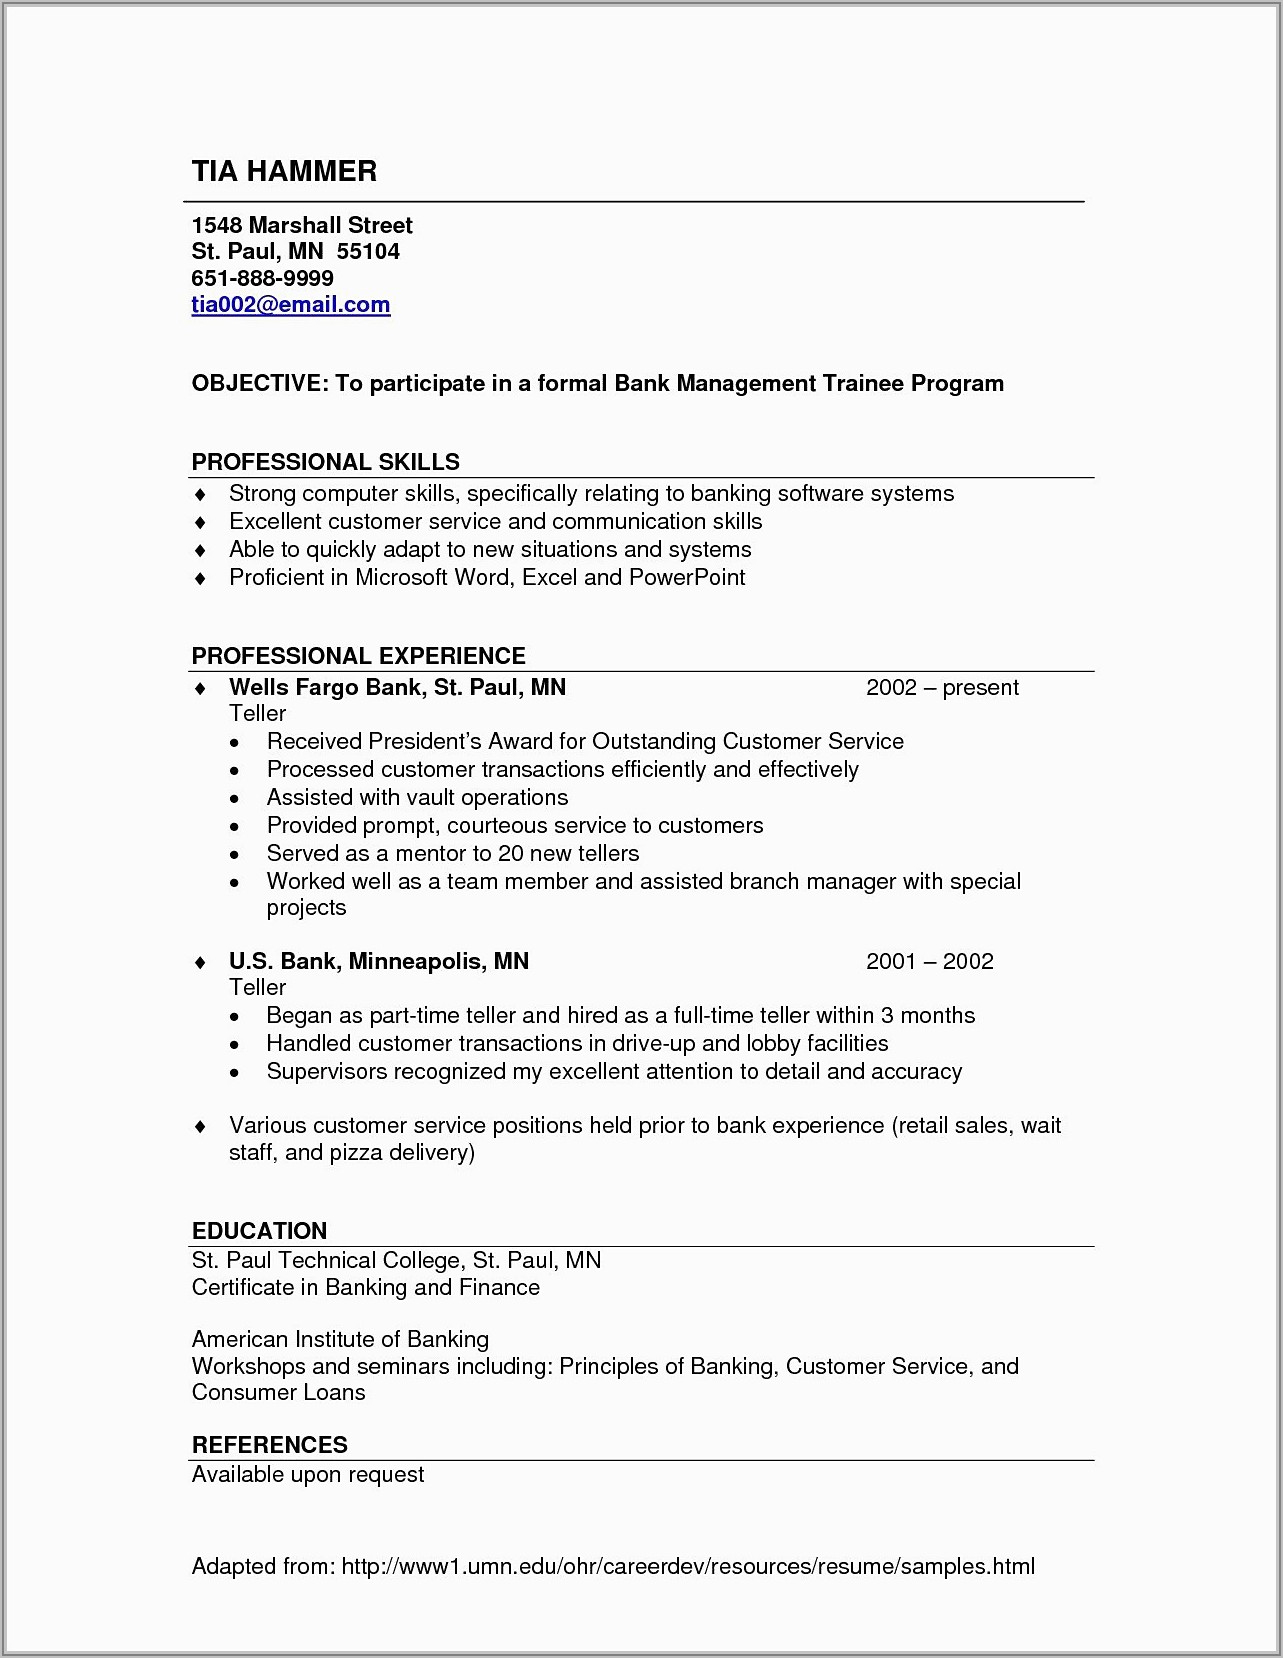 Sample Resume Format For Applying Abroad